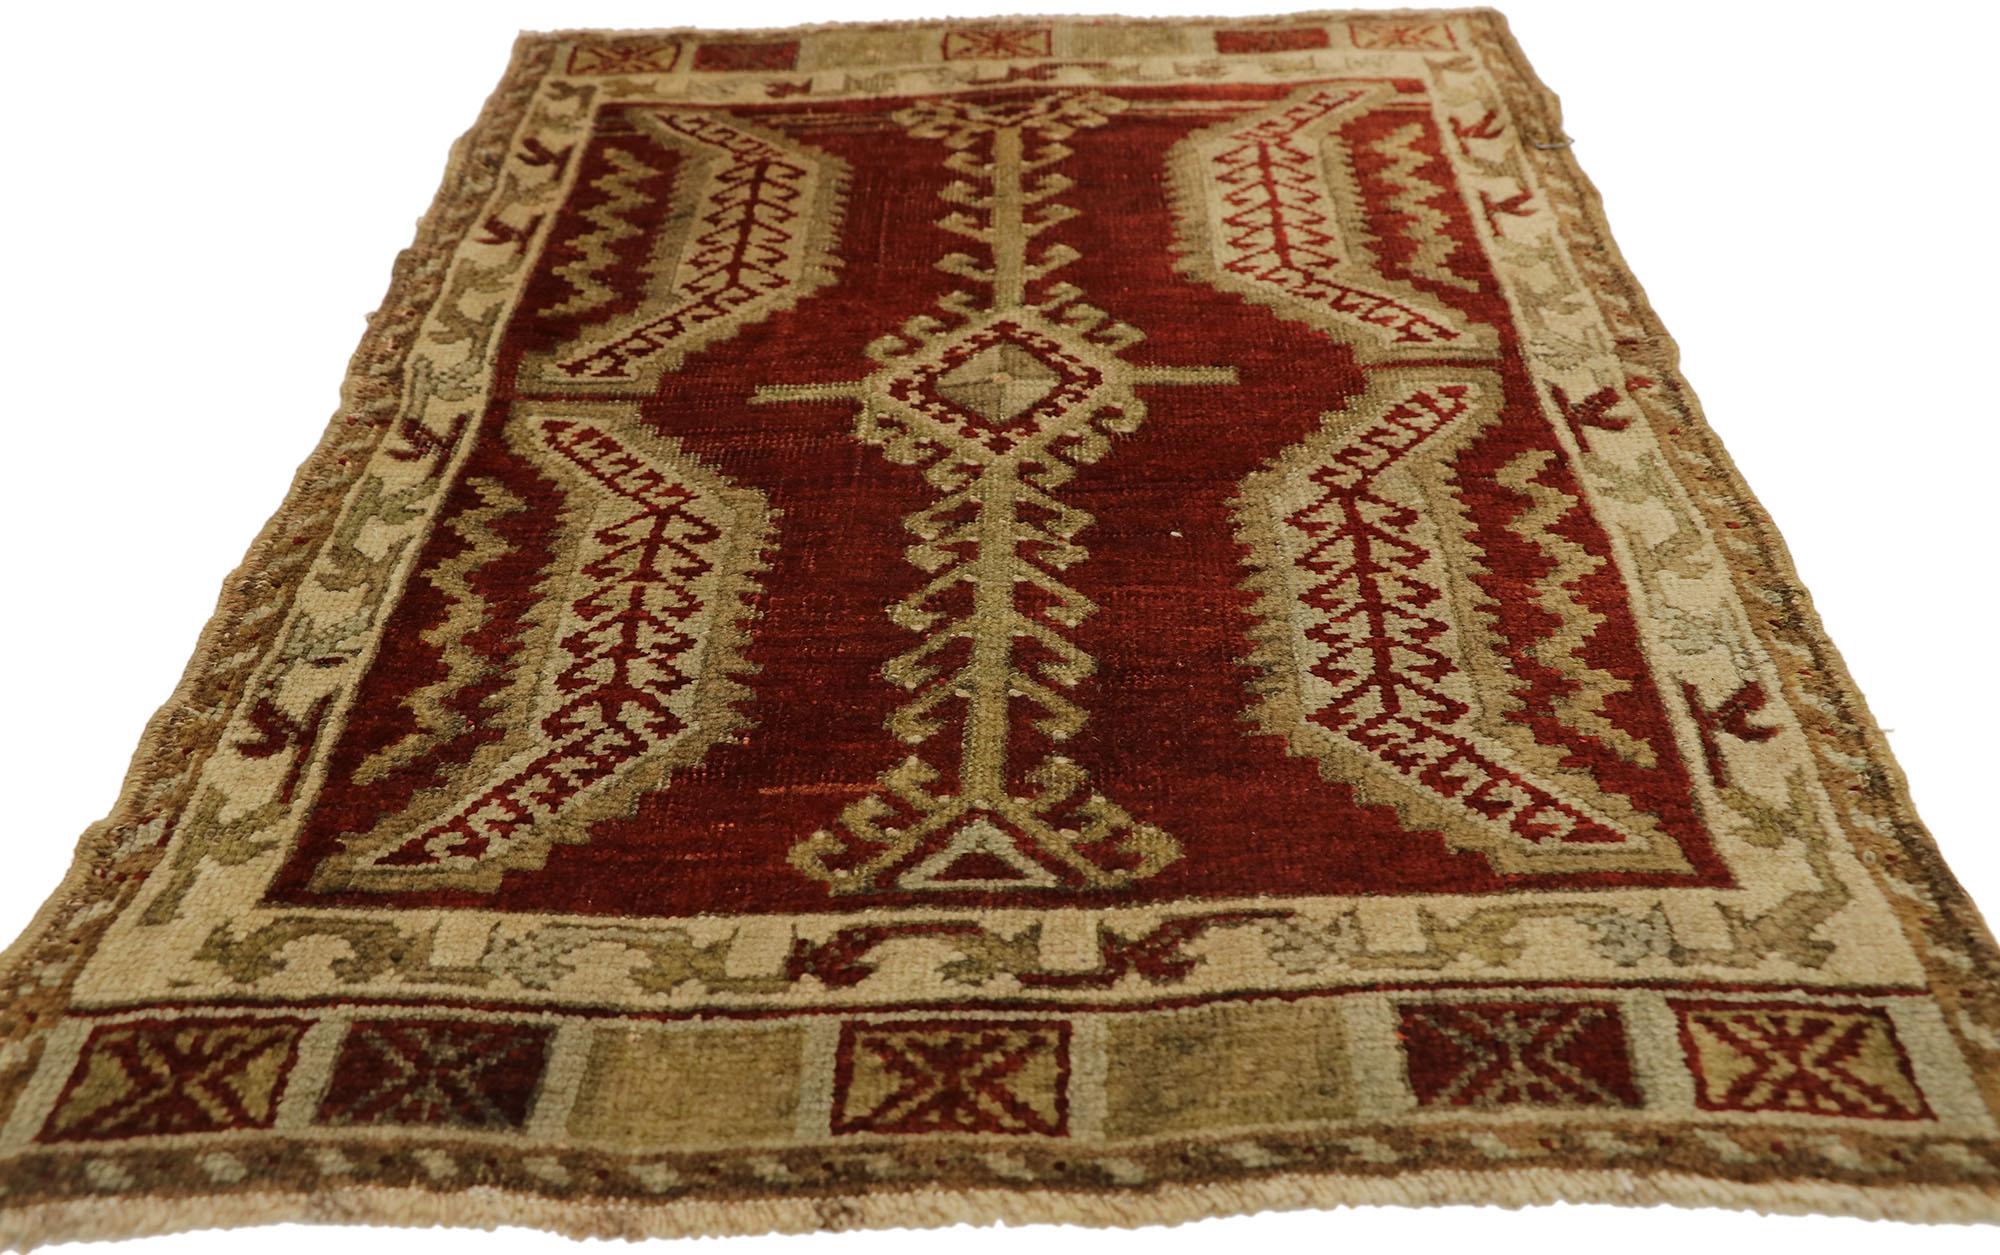 Vintage Turkish Oushak Yastik Scatter Rug, Small Accent Rug In Good Condition For Sale In Dallas, TX